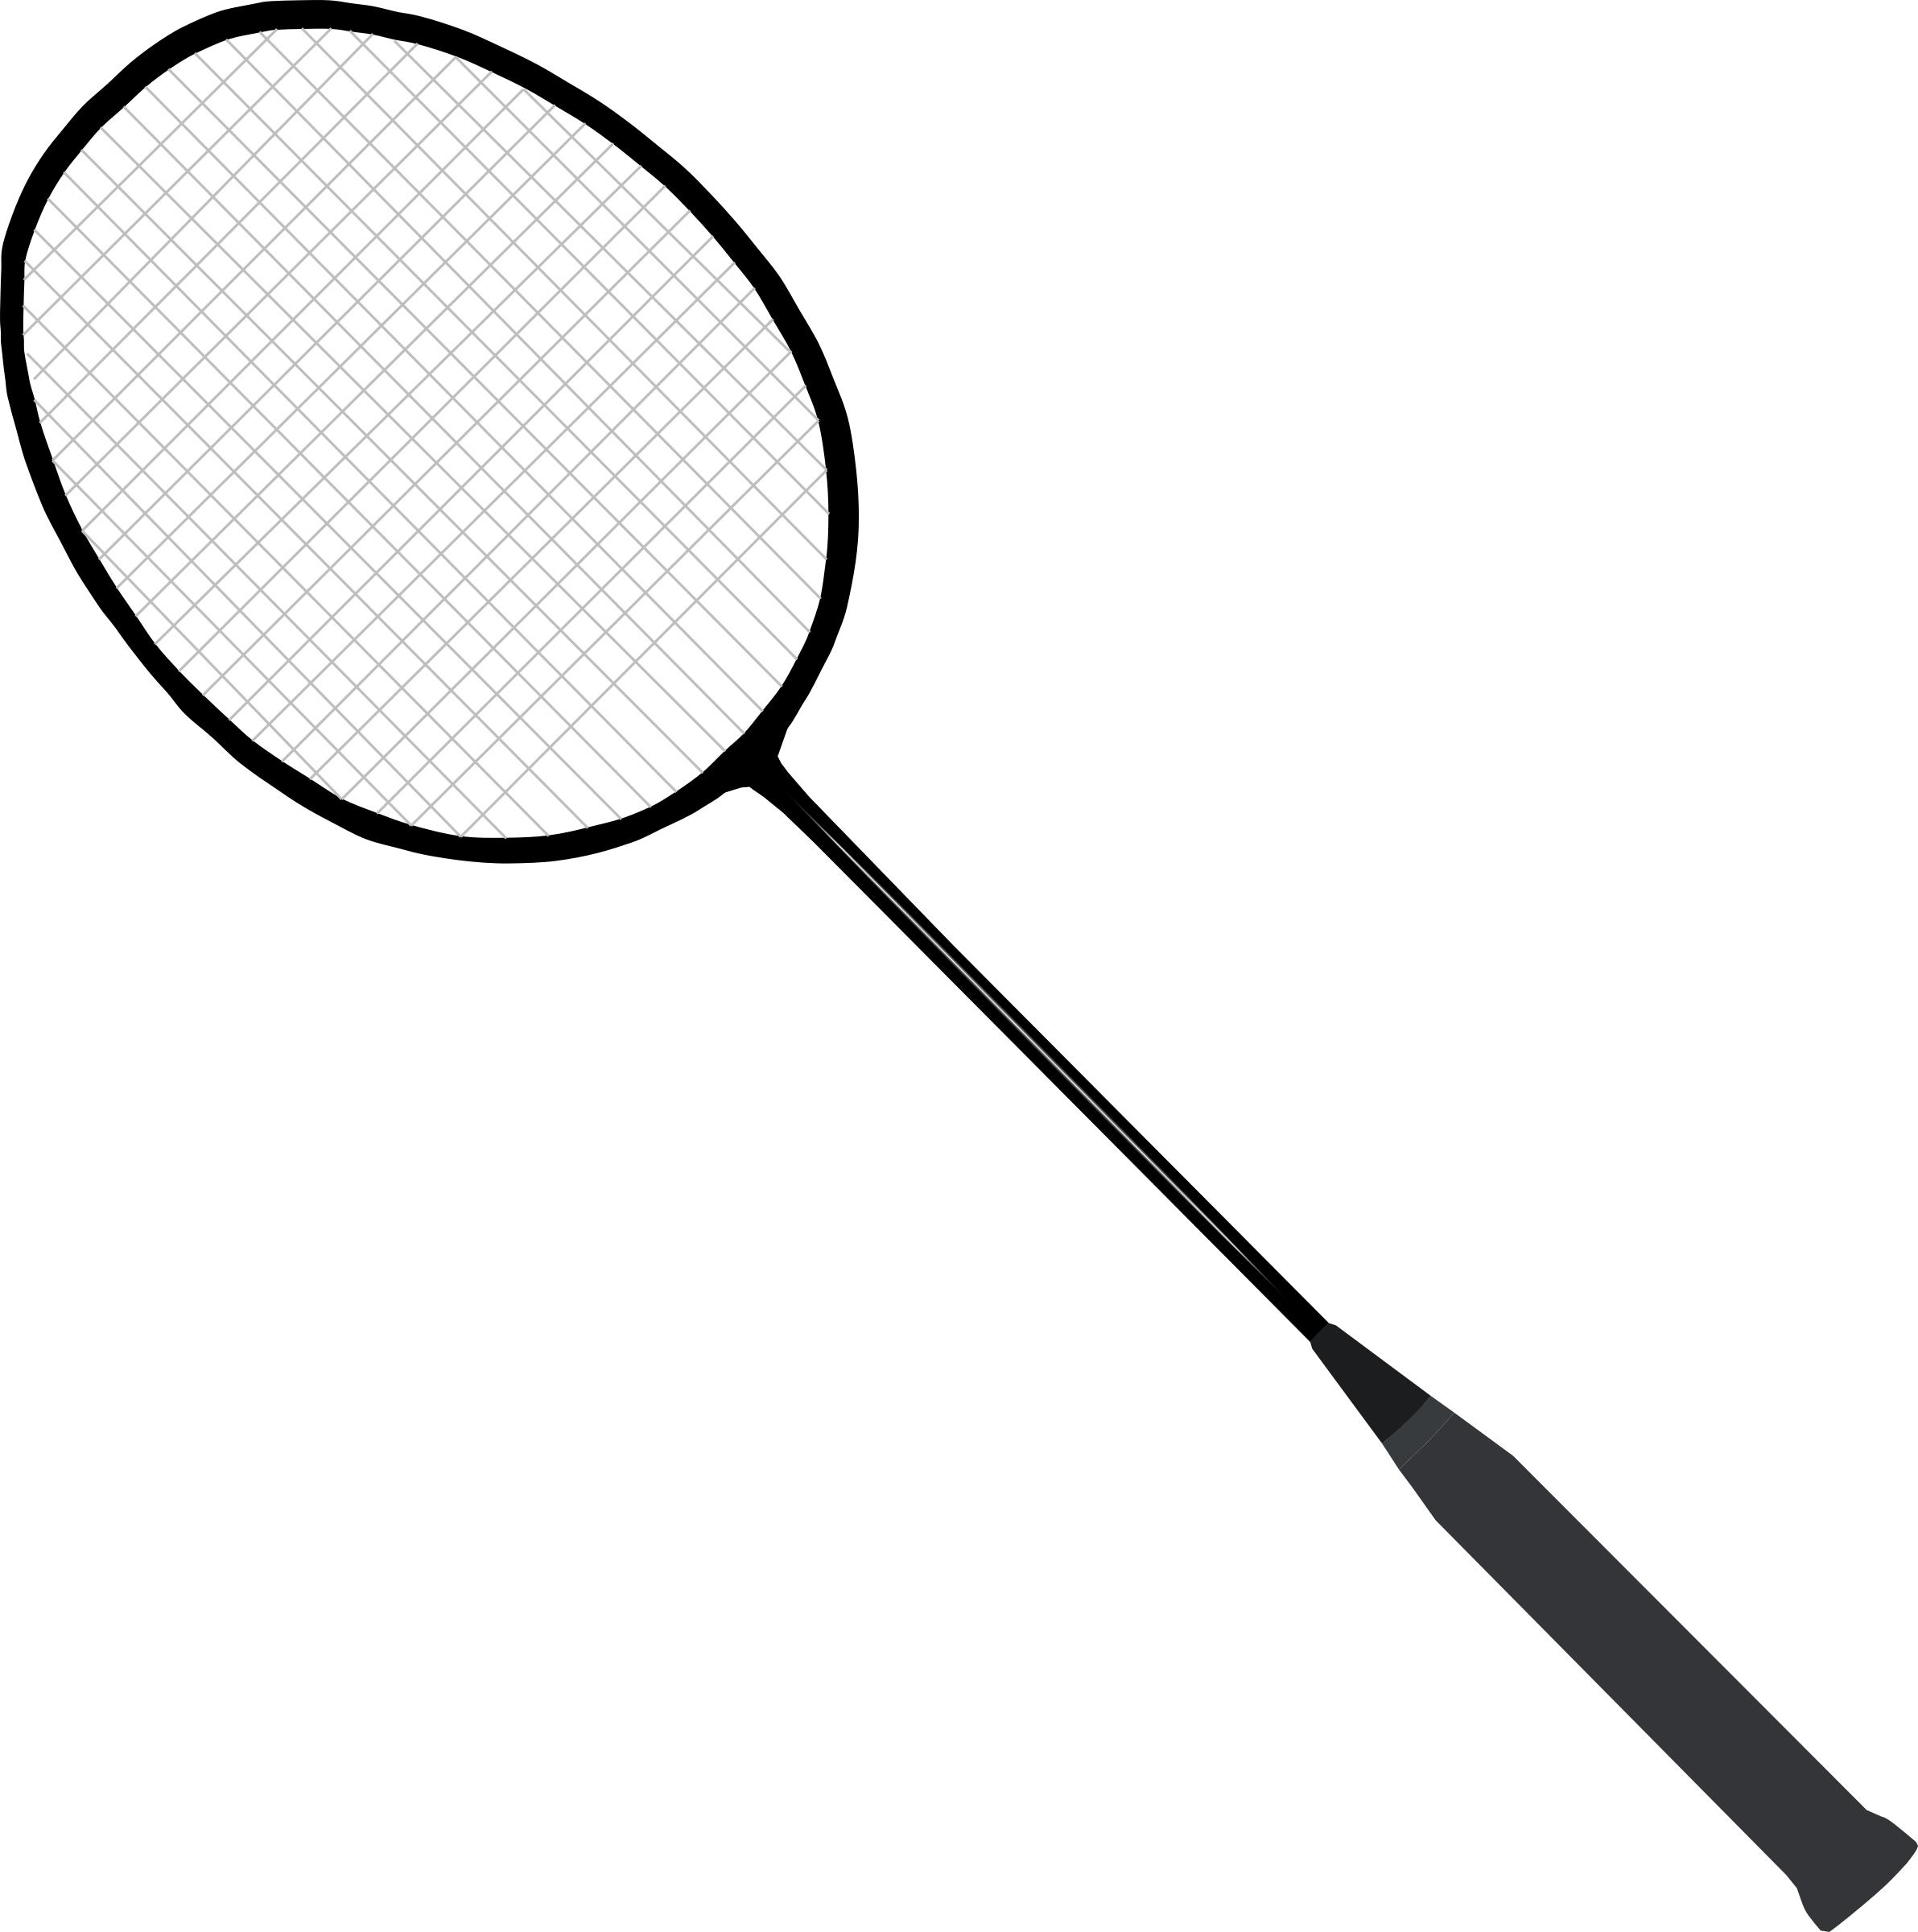 Badminton racket (with strings) png